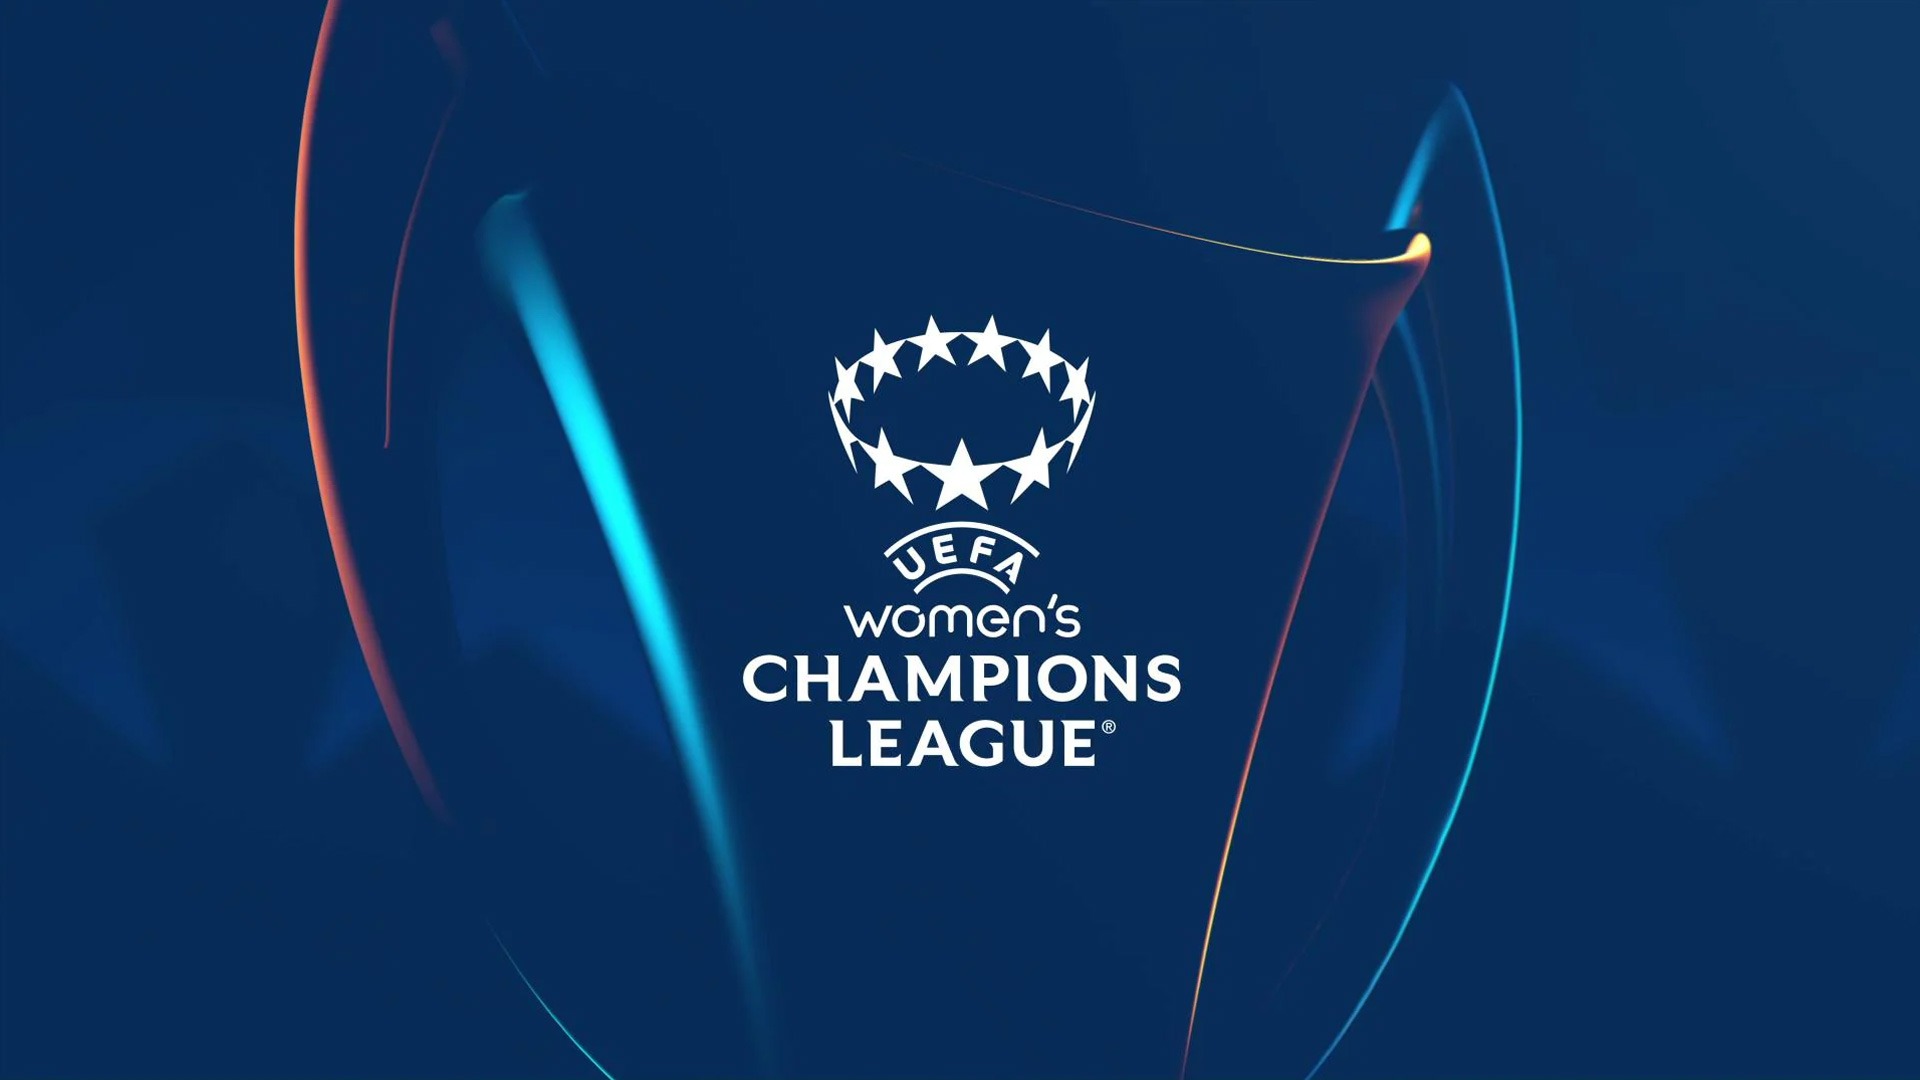 New anthem and logo unveiled for UEFA Women's Champions League » The Blog »  CPD Football by Chris Punnakkattu Daniel